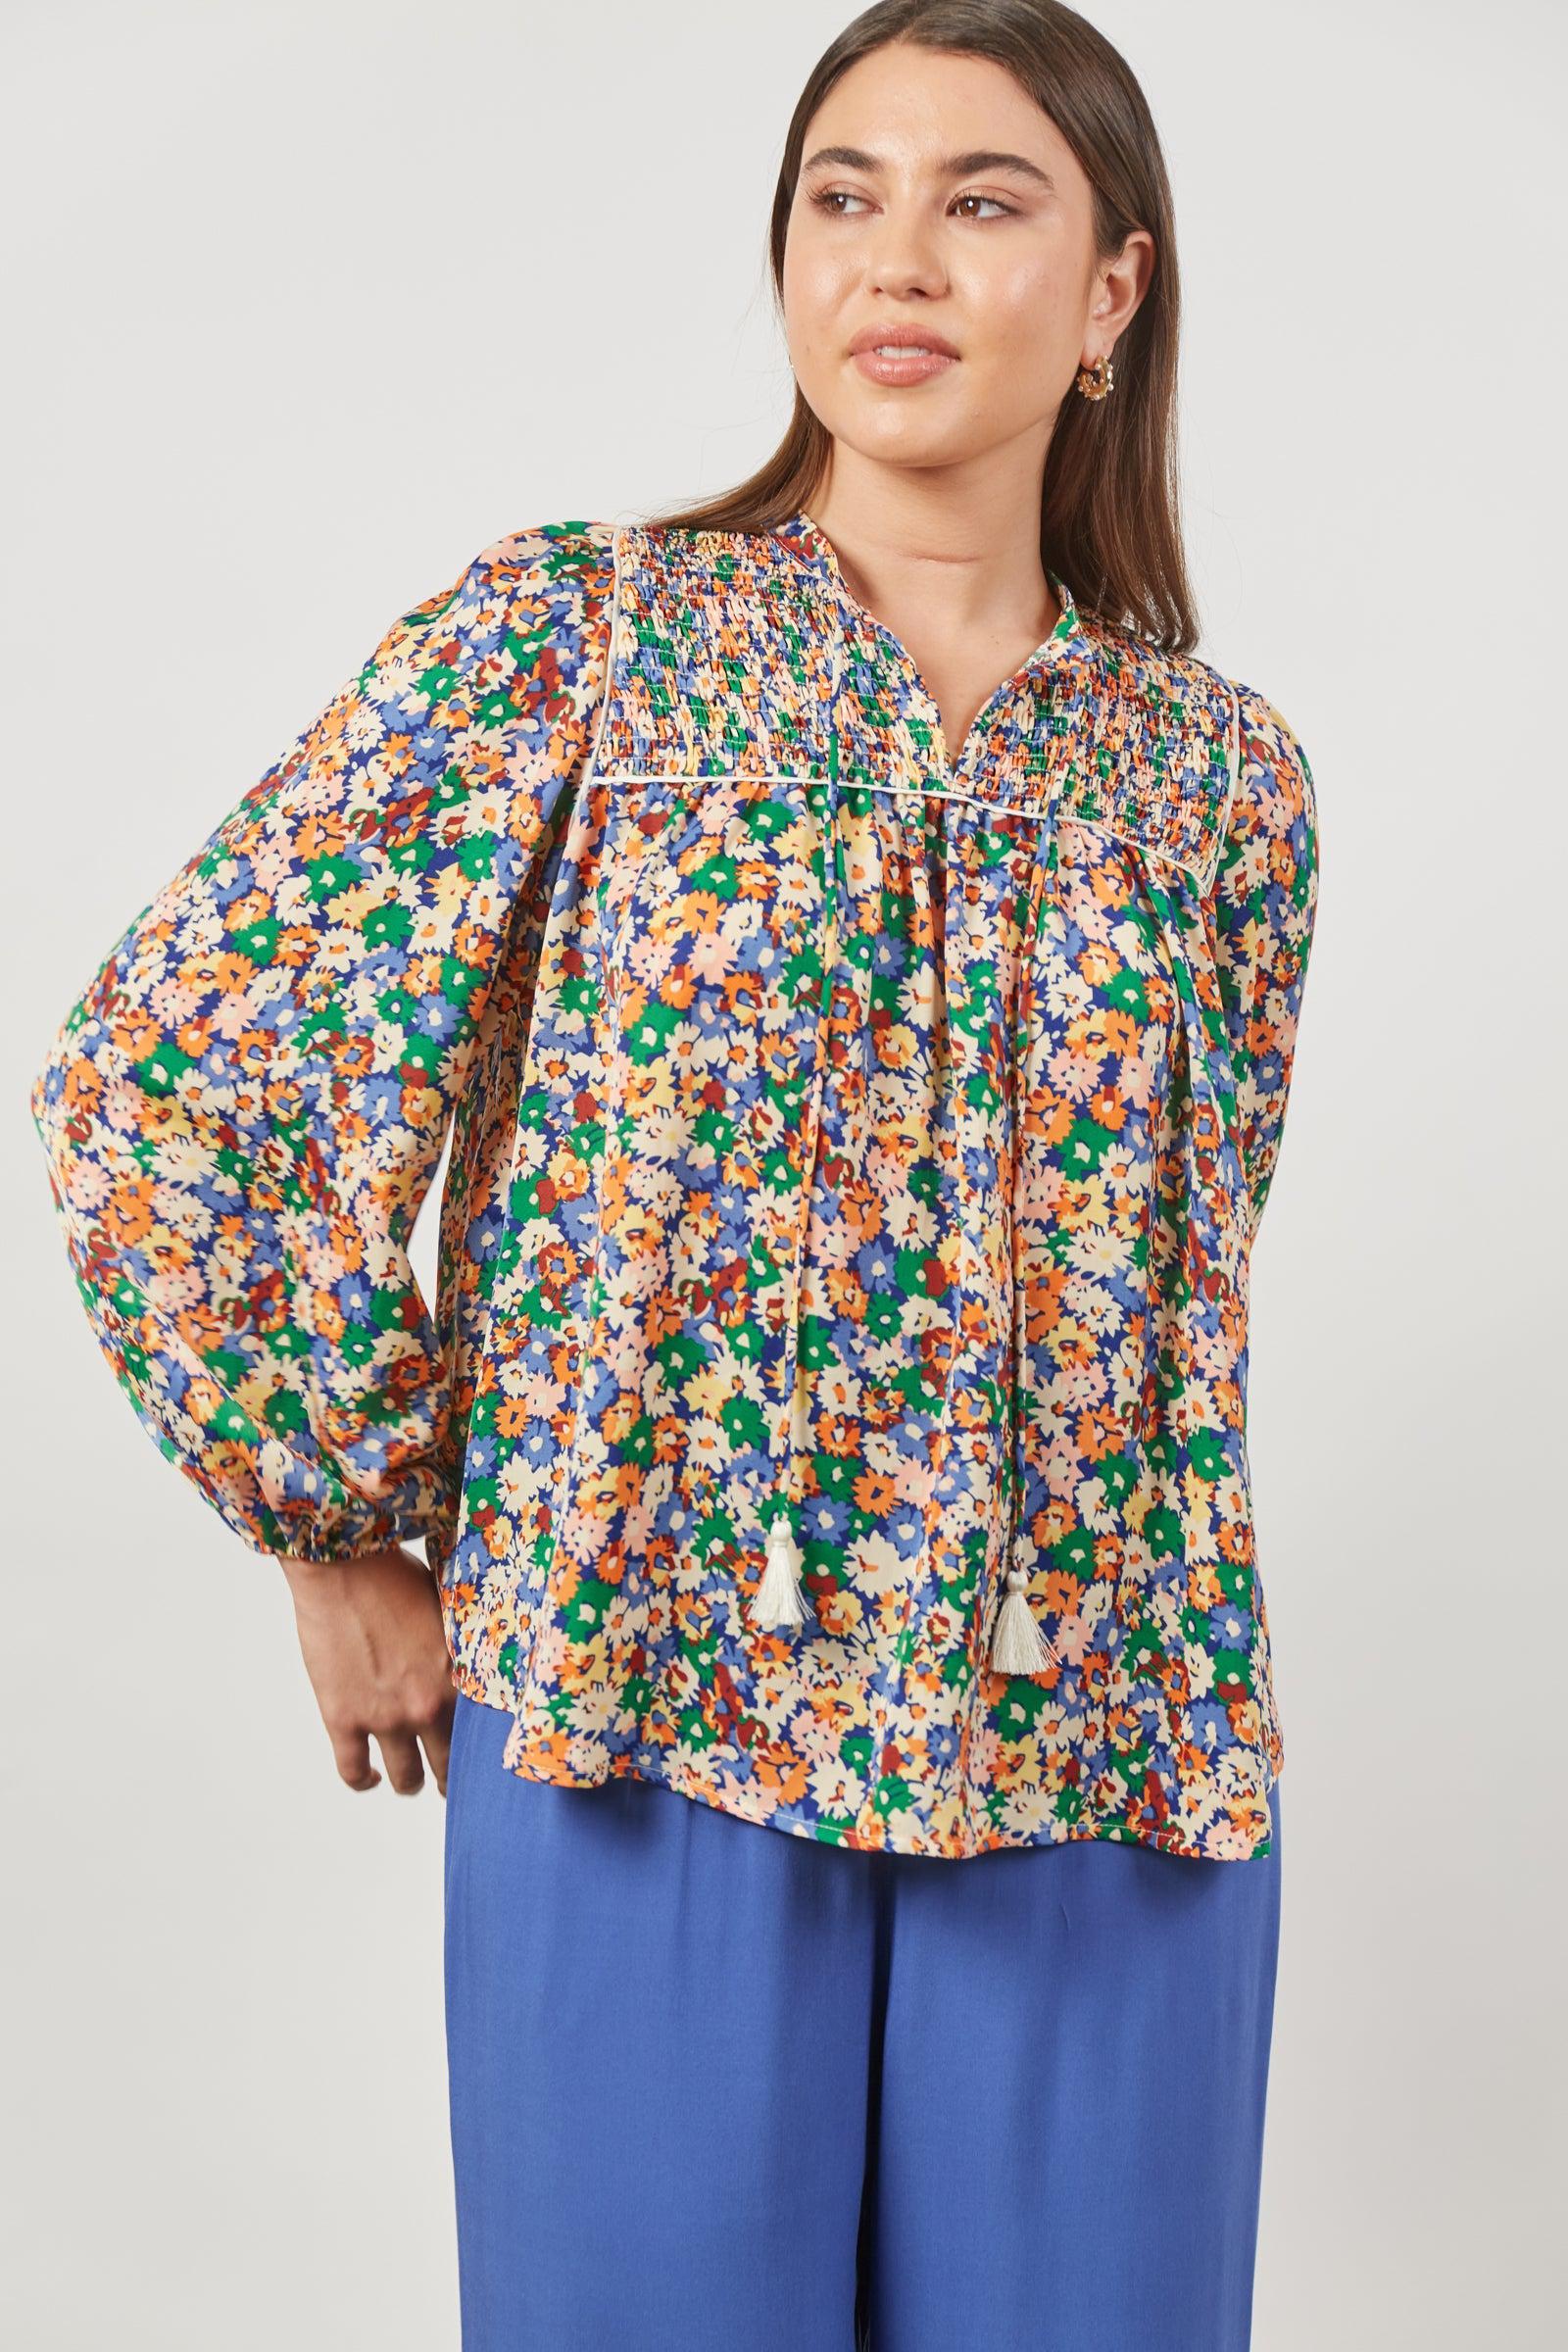 Romance Blouse - Meadow Bloom-Tops-Isle Of Mine-The Bay Room